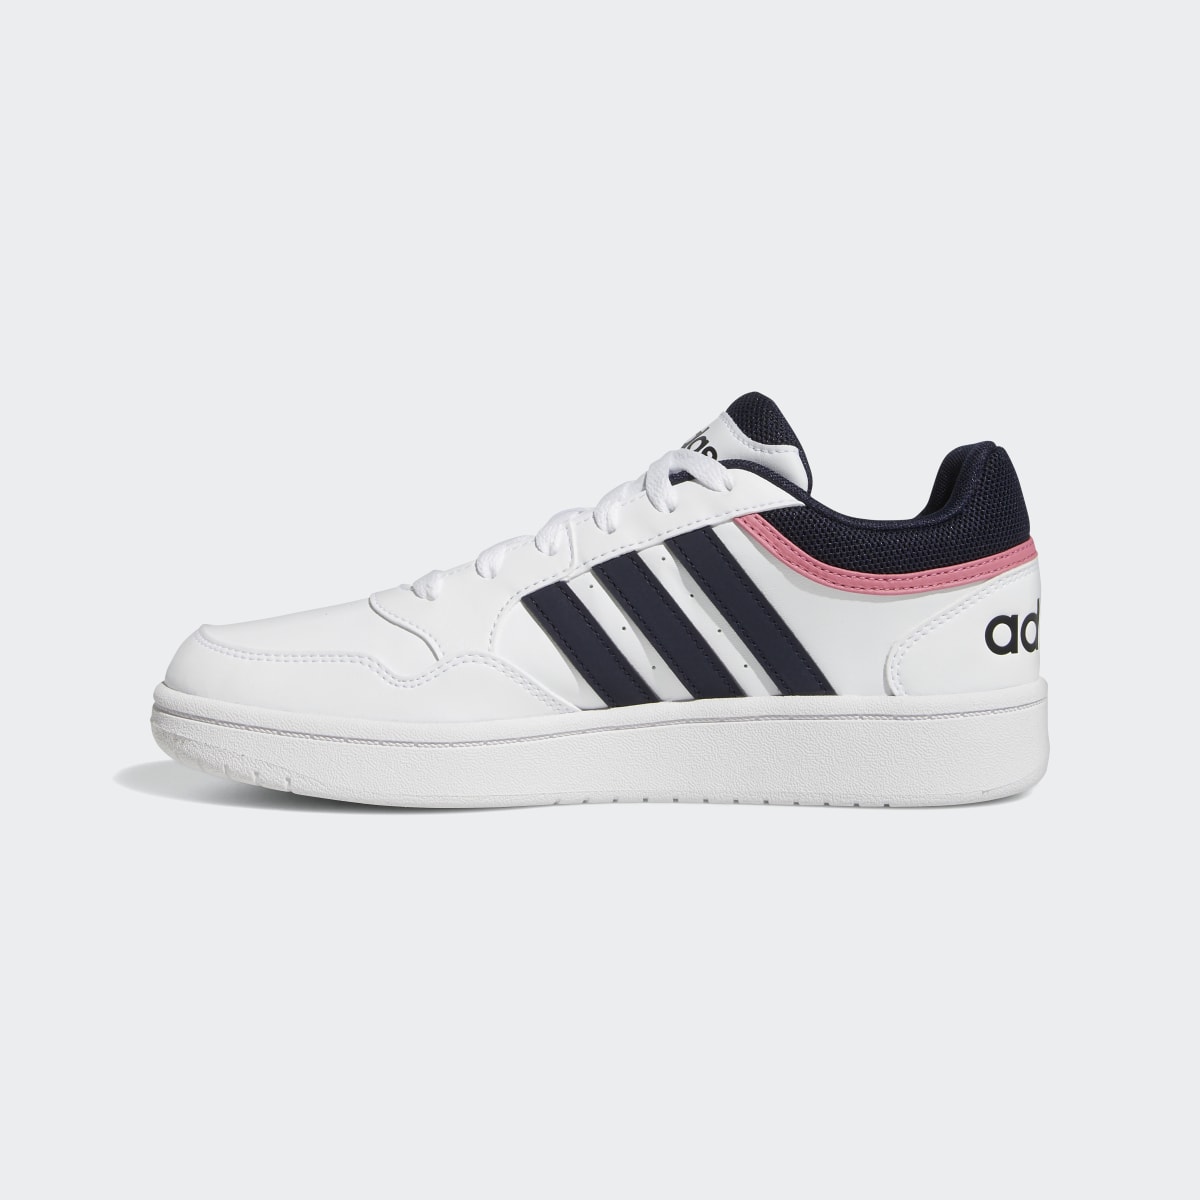 Adidas Hoops 3.0 Low Classic Shoes. 7